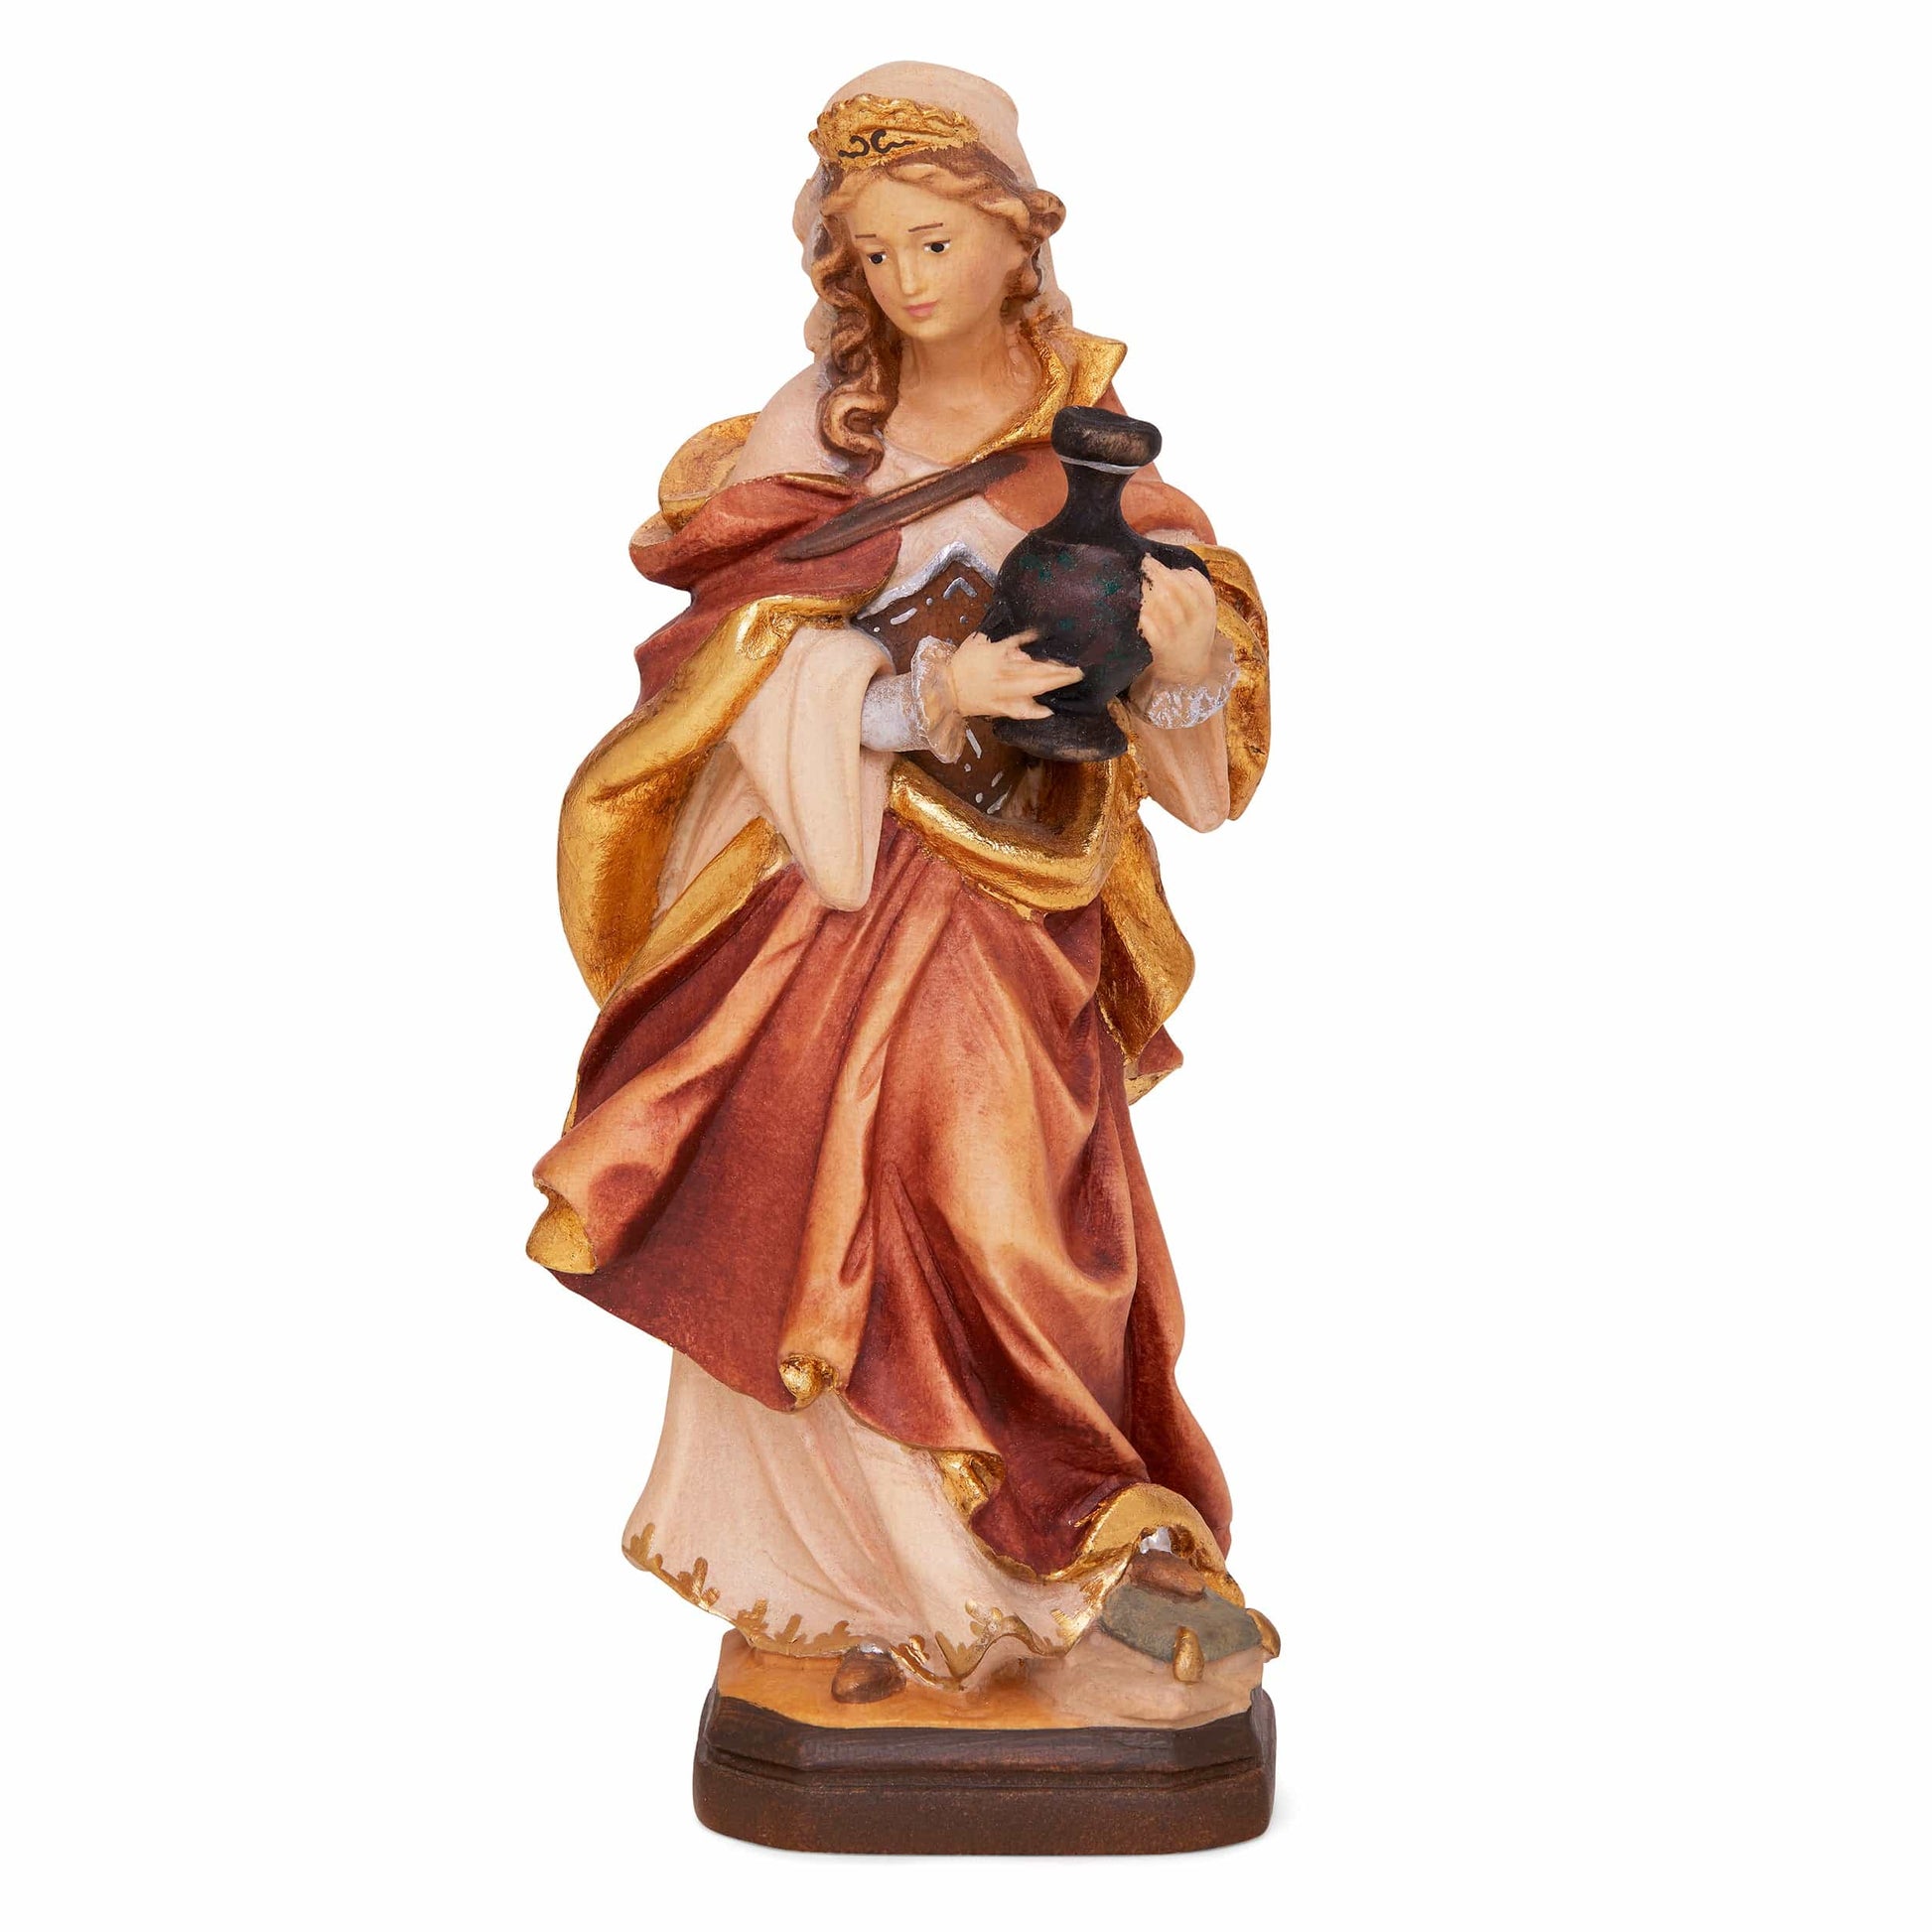 MONDO CATTOLICO 15 cm (5.90 in) Wooden Statue of St. Mary Magdalene